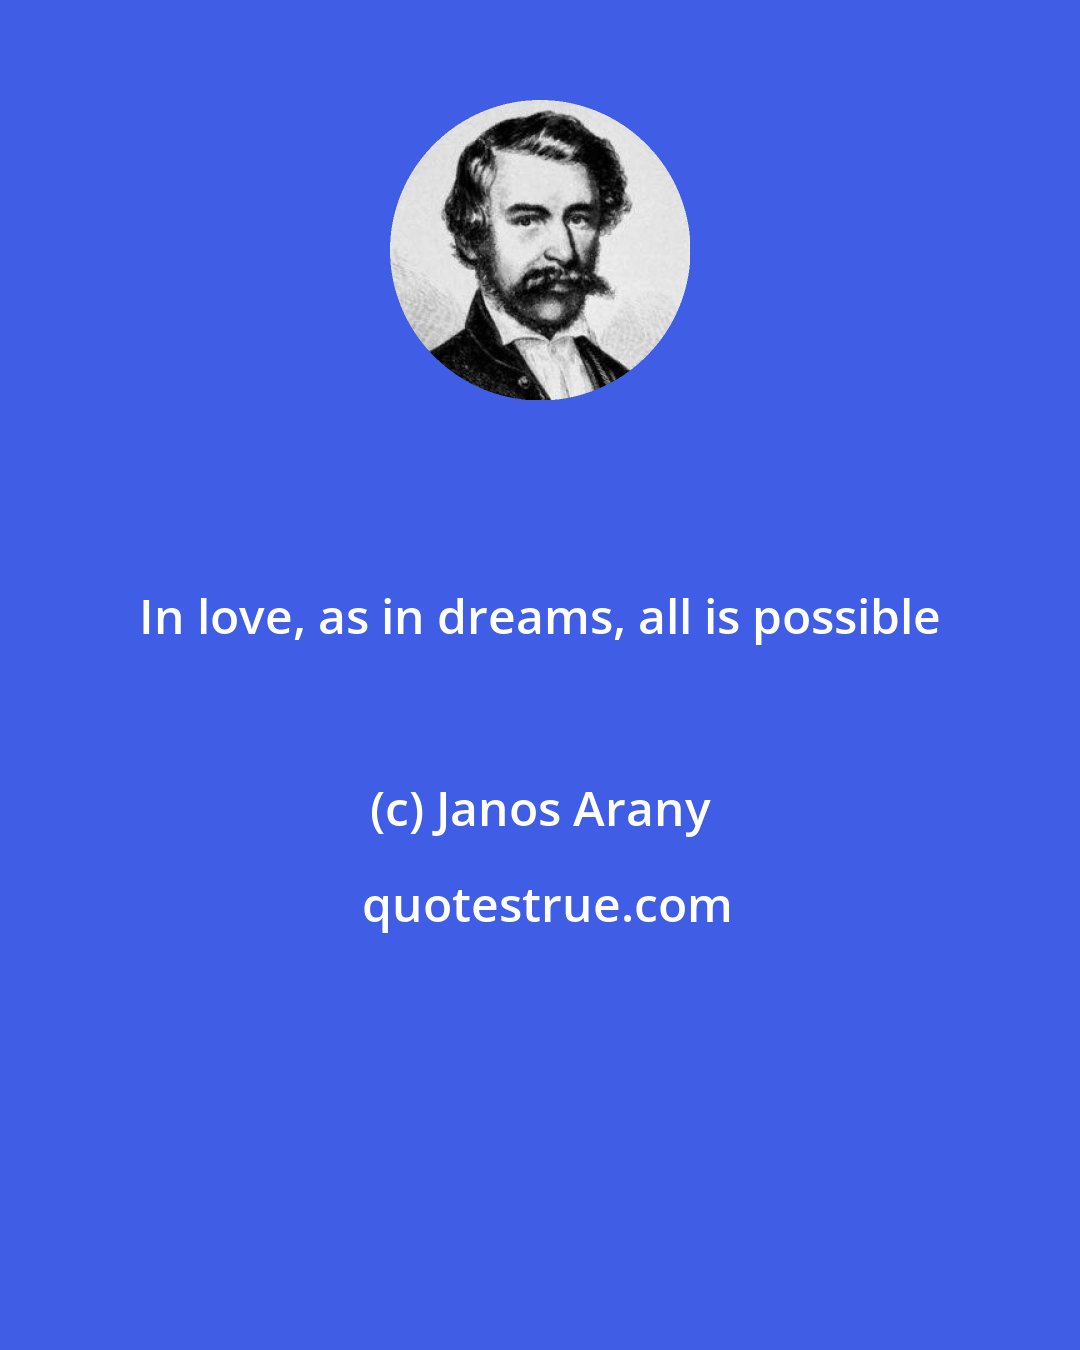 Janos Arany: In love, as in dreams, all is possible